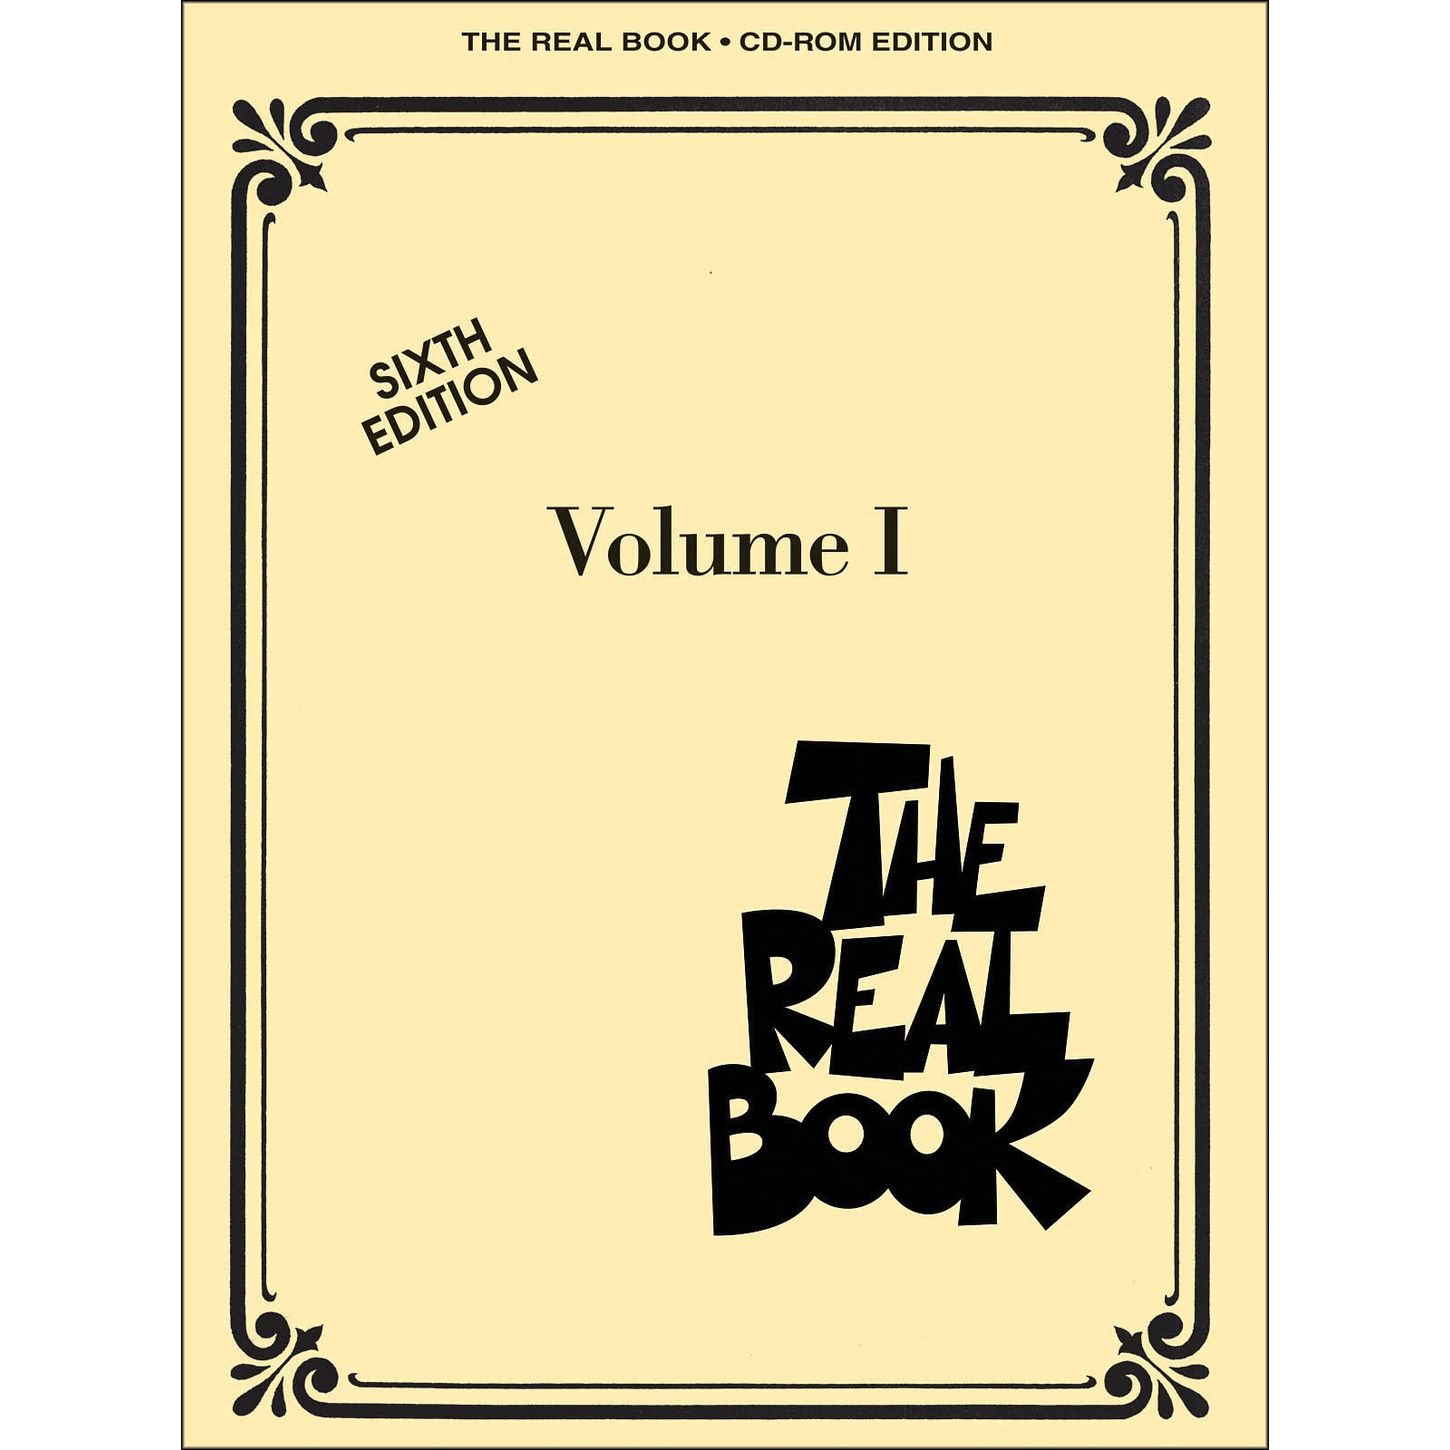 The New Real Book Pdf 3